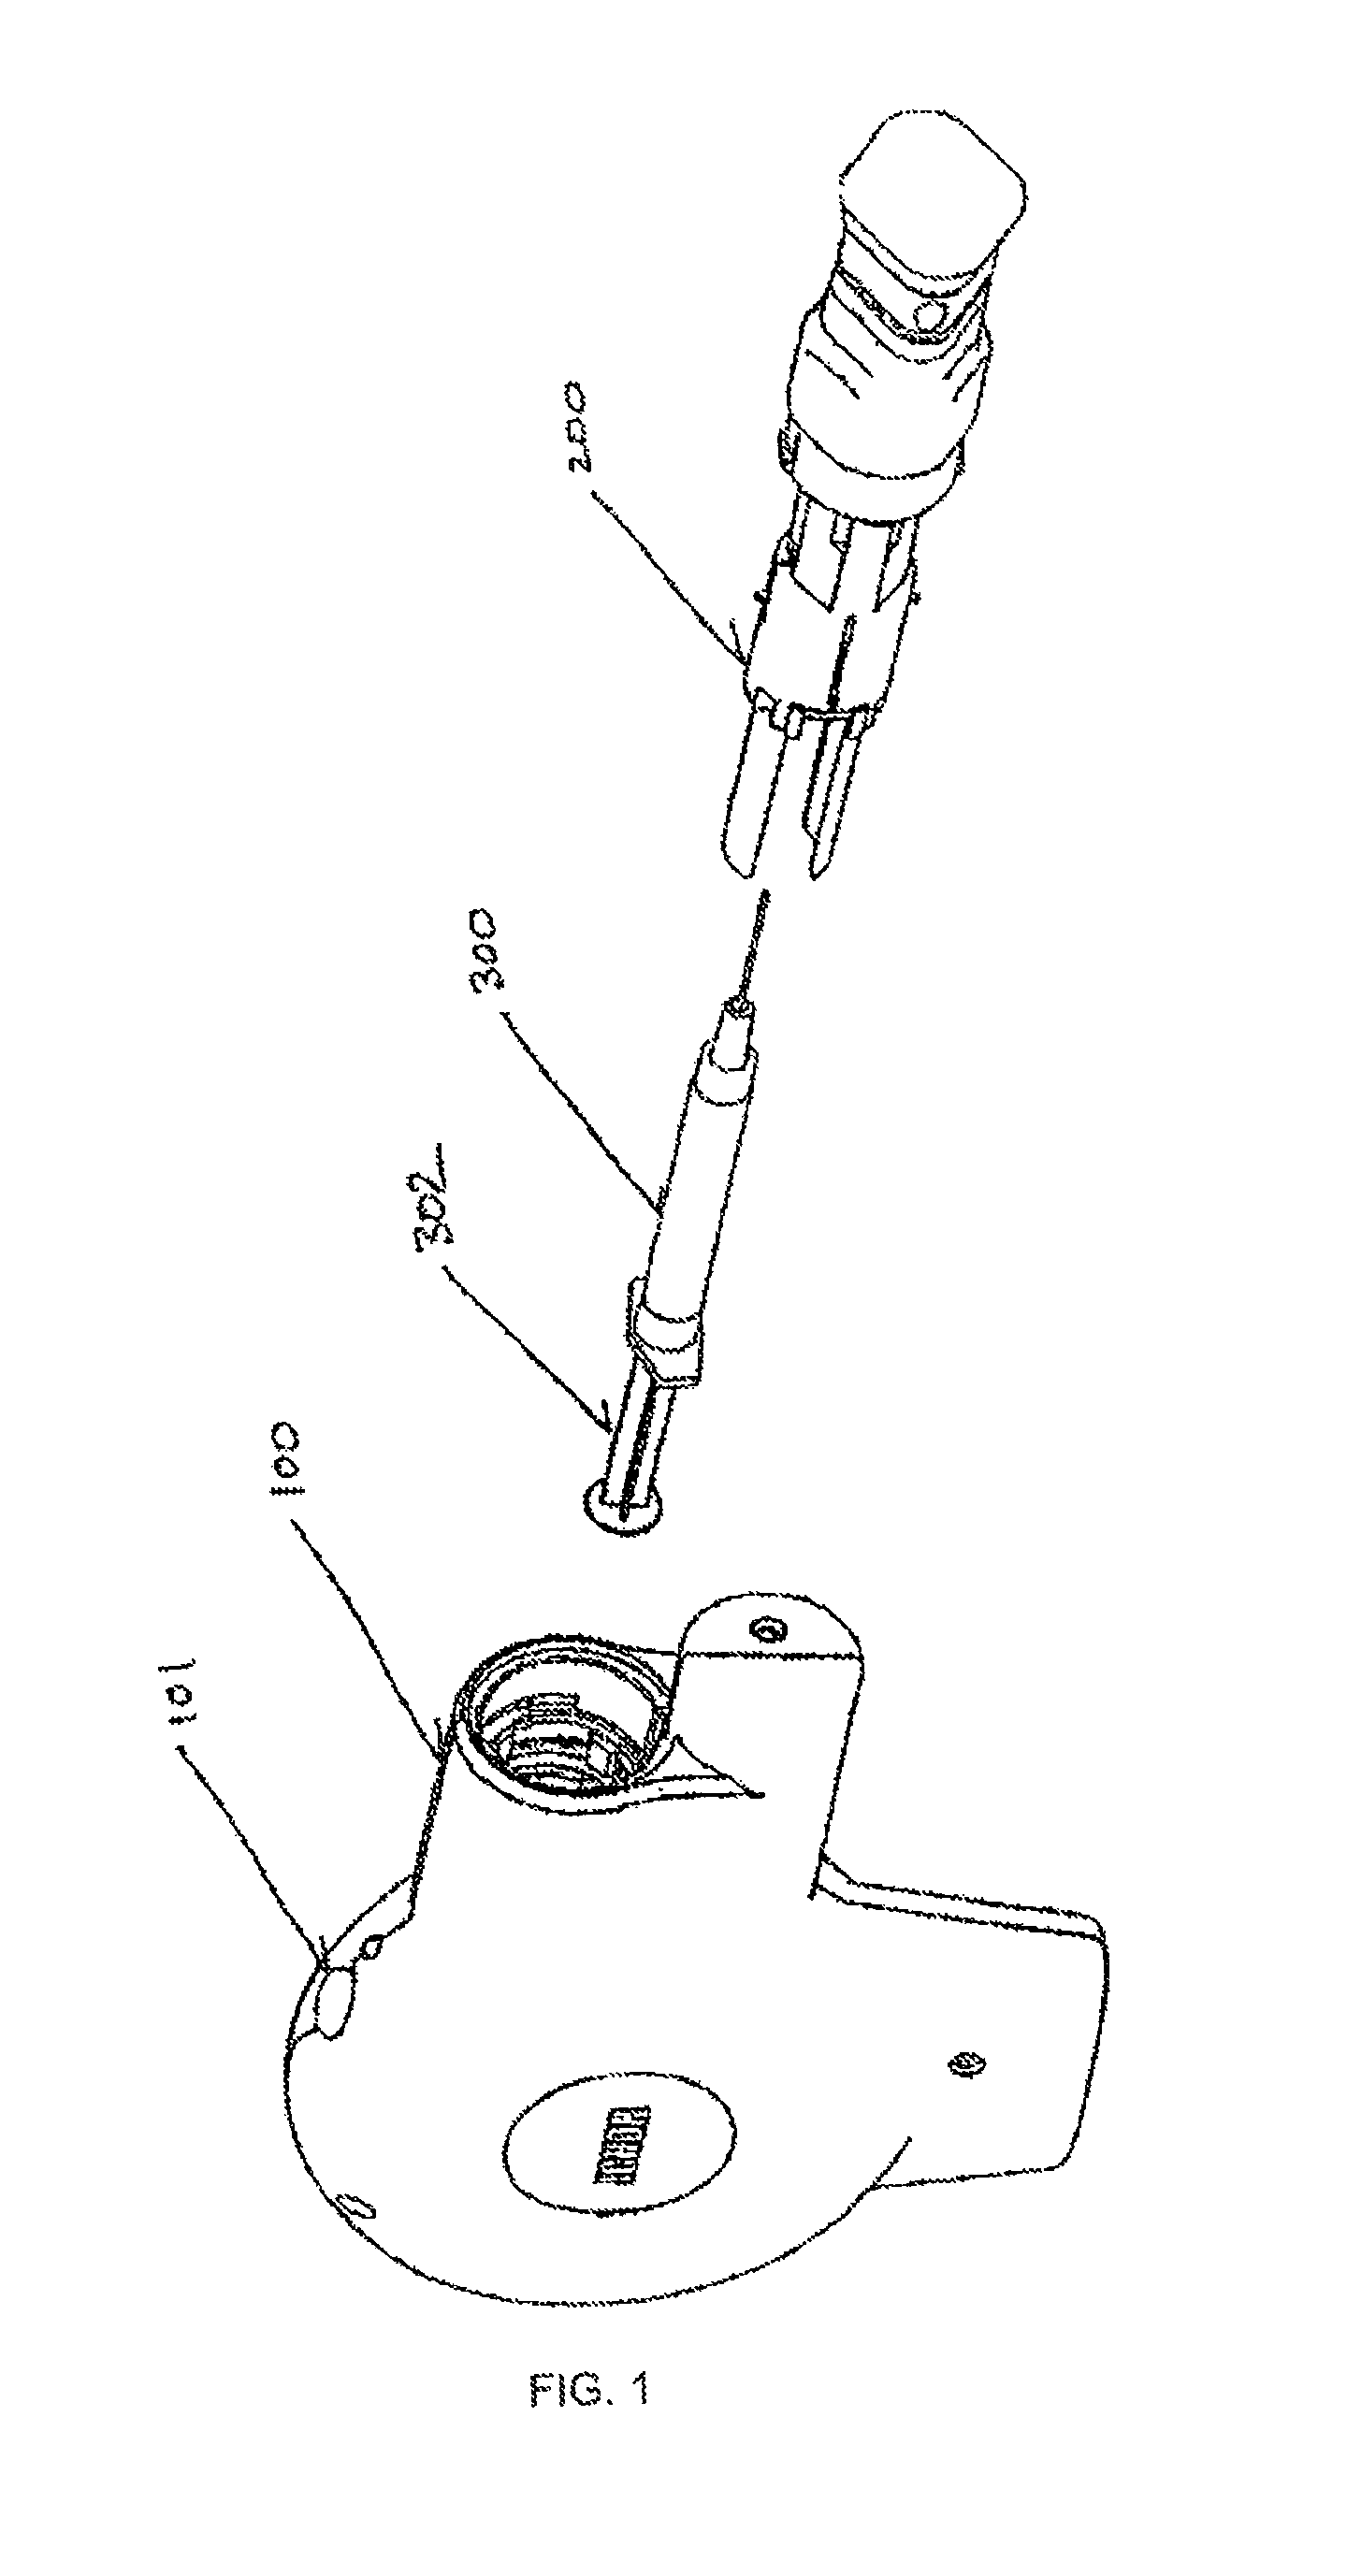 Apparatus for electrically mediated delivery of therapeutic agents